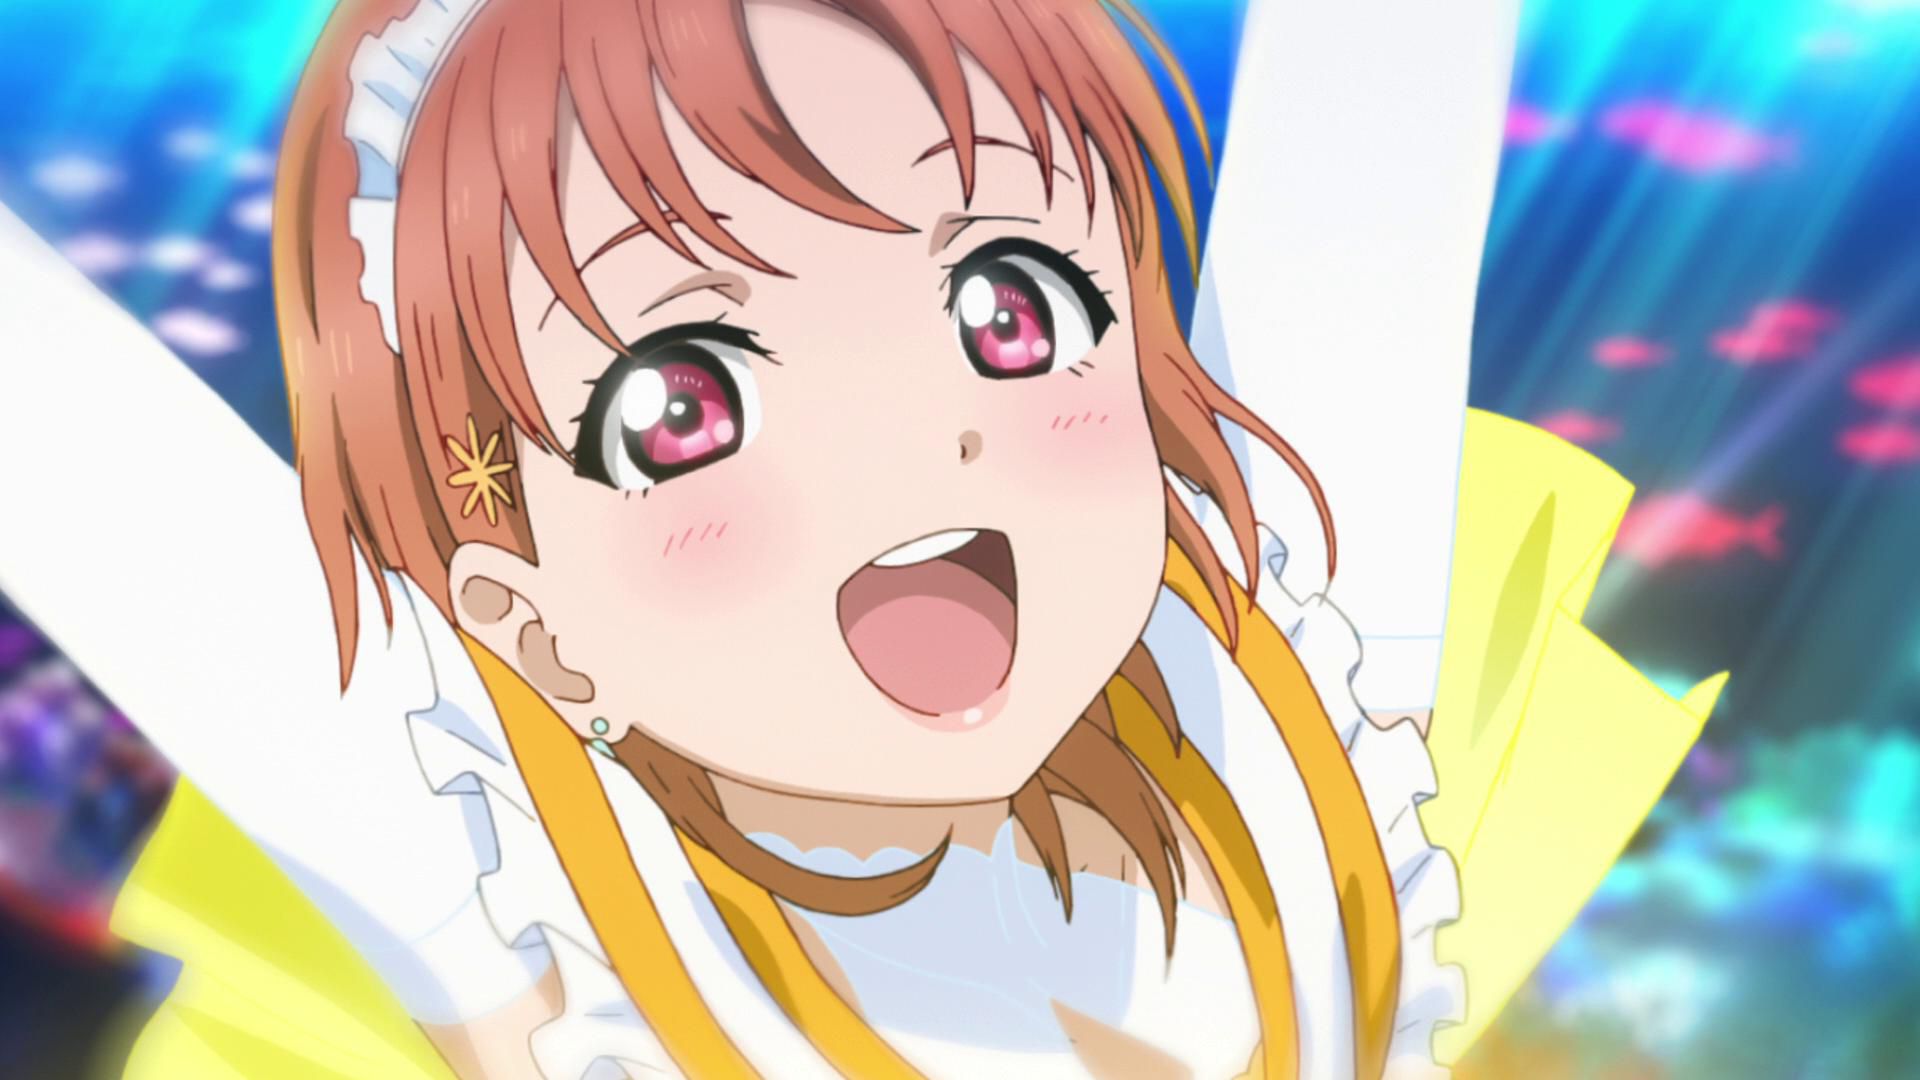 [Image] "love live! Sunshine "1000 songs she bend was its cute scene image competitions wwwwwwwwww 62